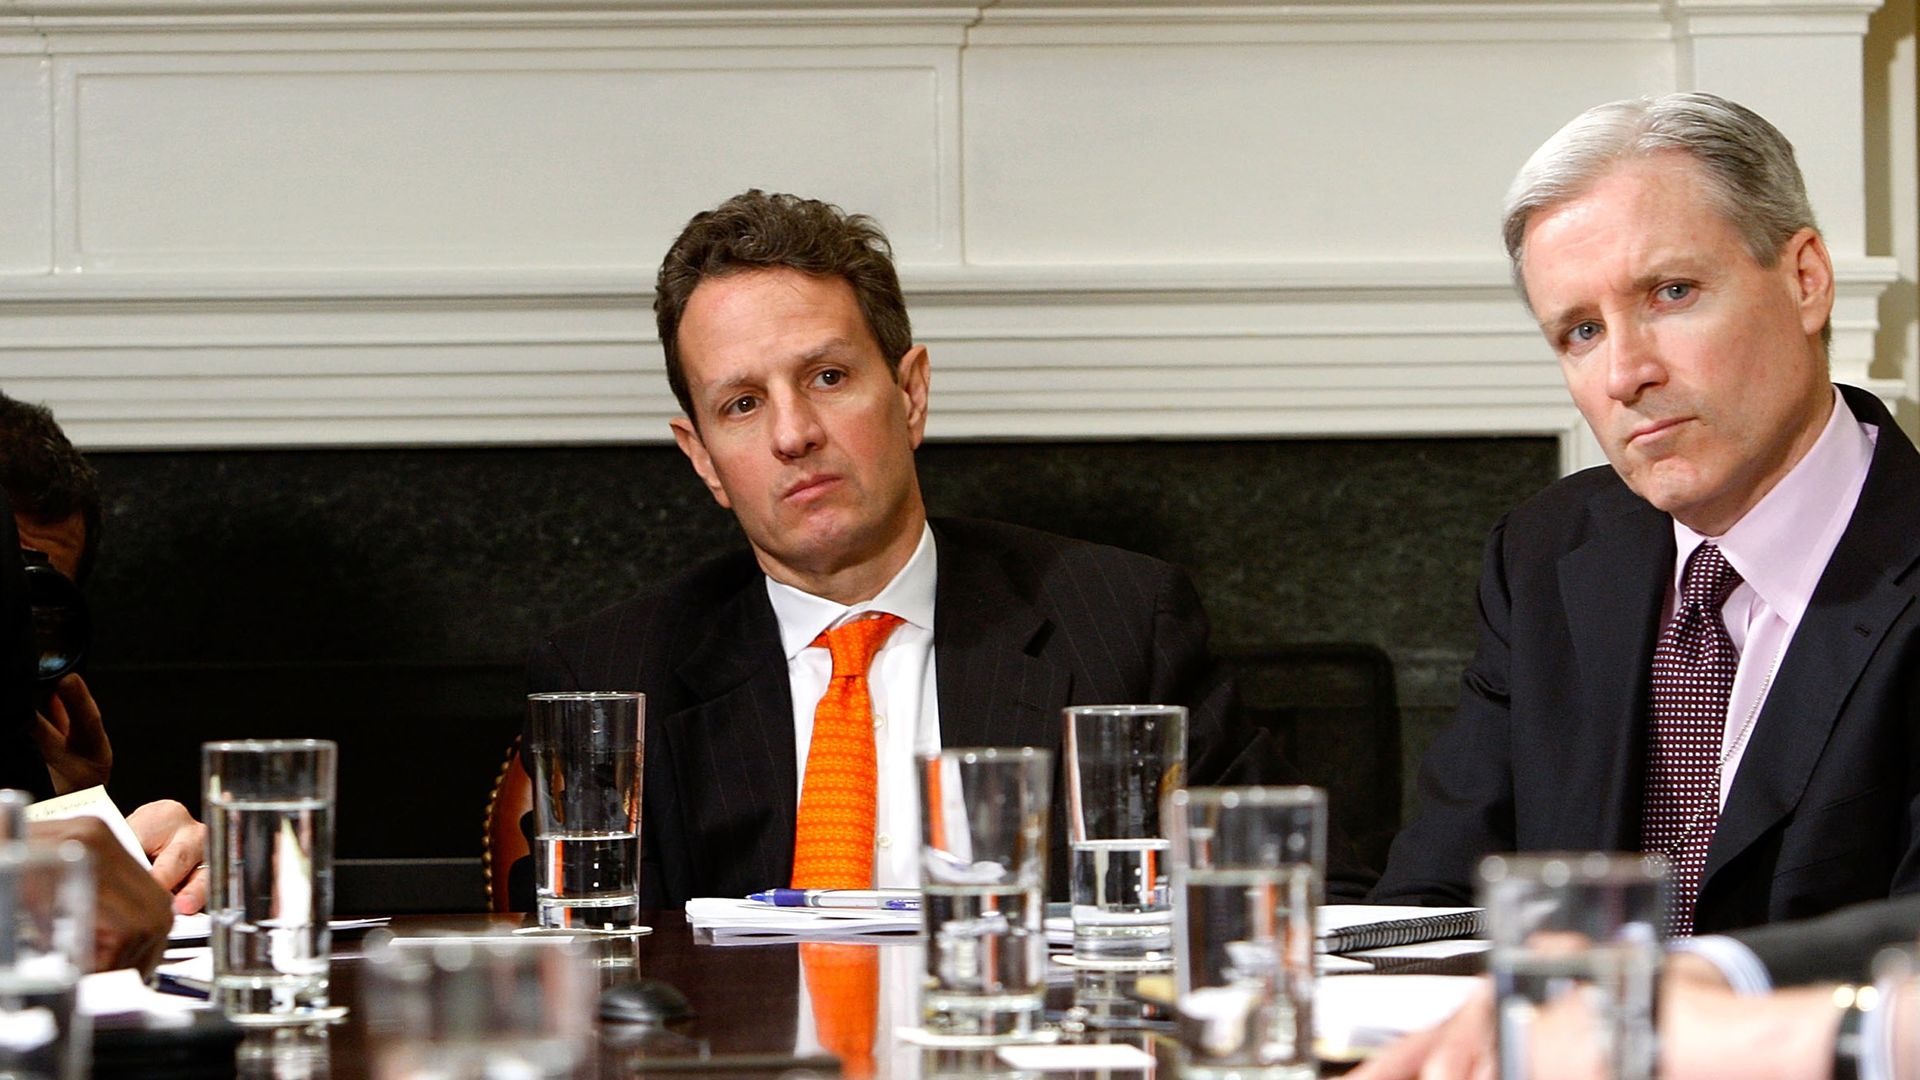 Former Treasury Secretary Timothy Geithner (left) is seen sitting in the White House with Mark Gallogly.